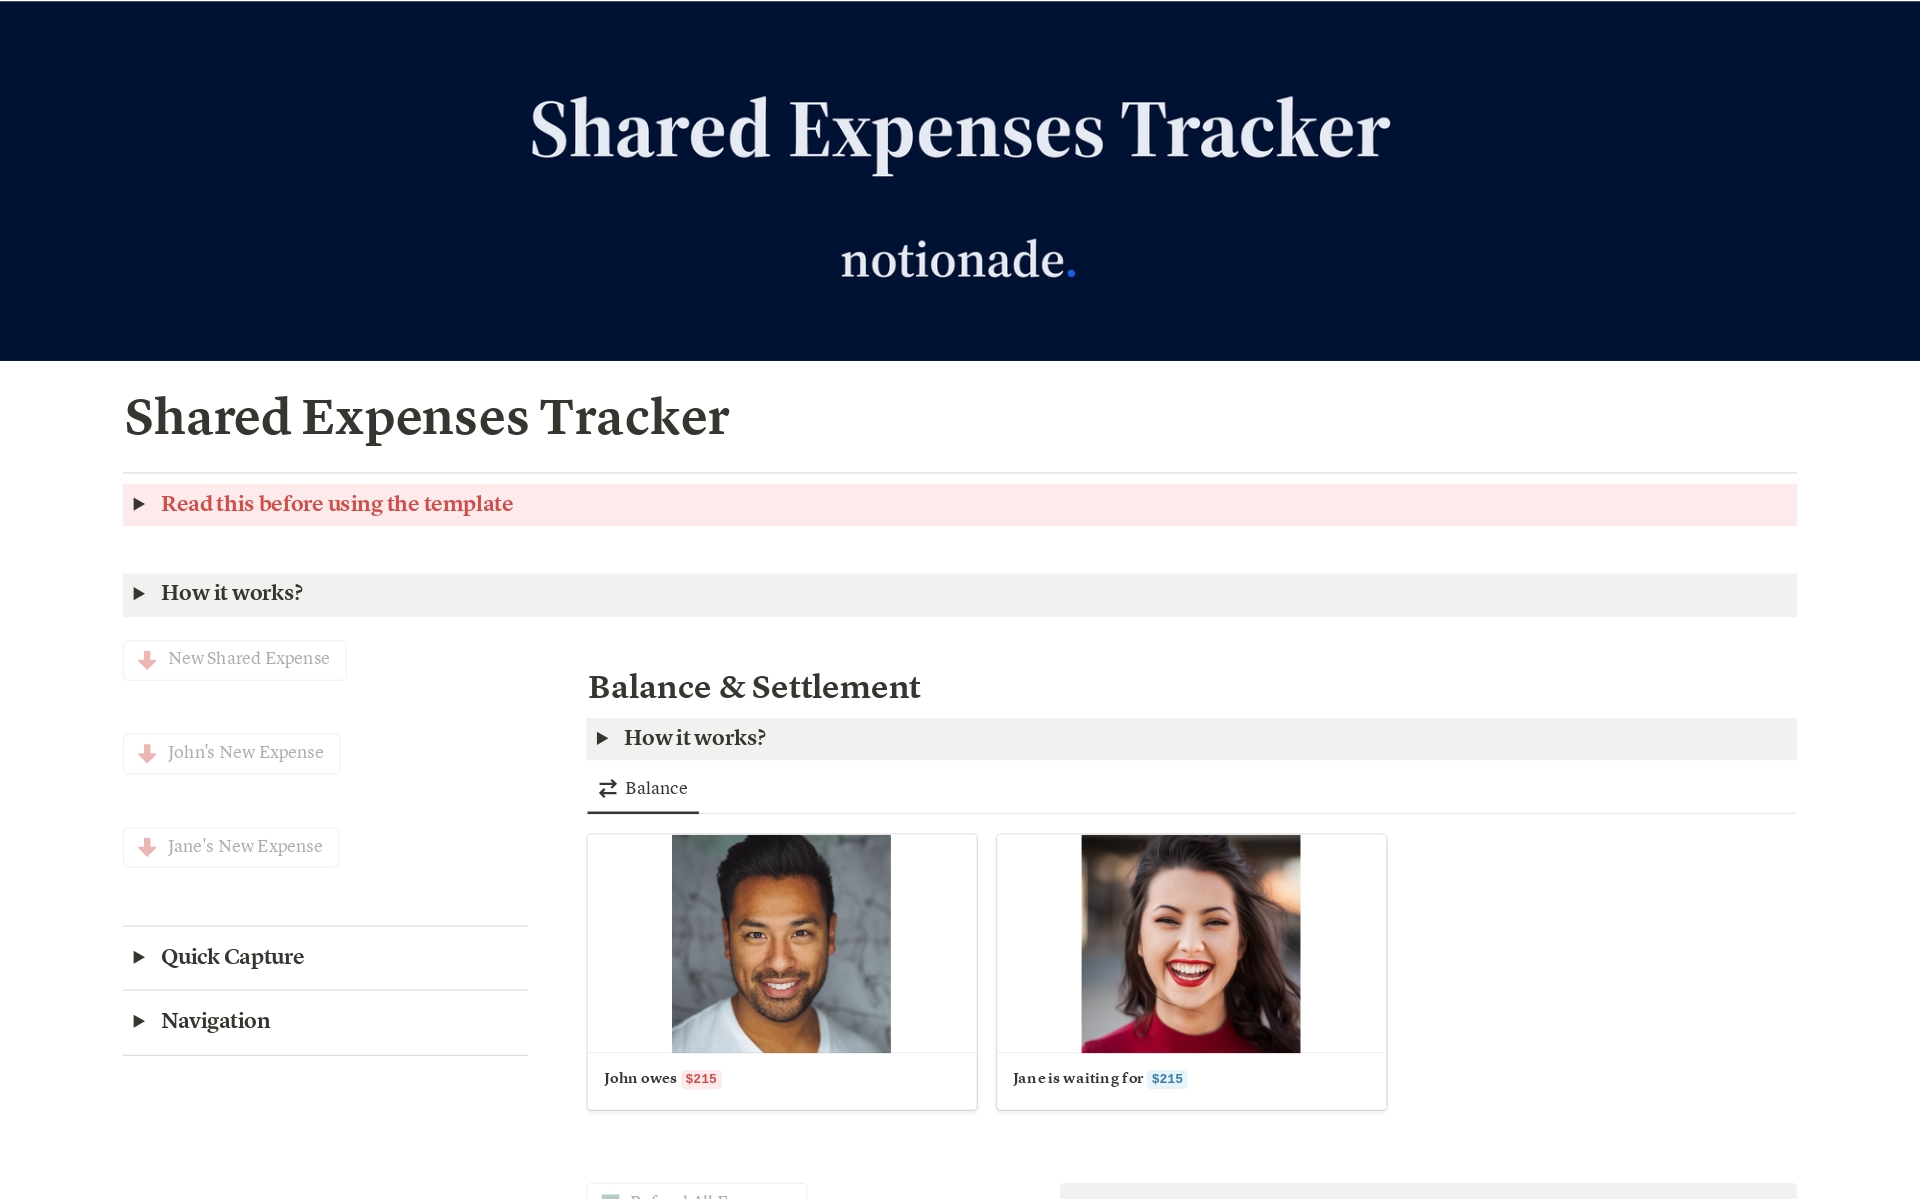 Track of the expenses you share with someone else and always know how much you owe each other.